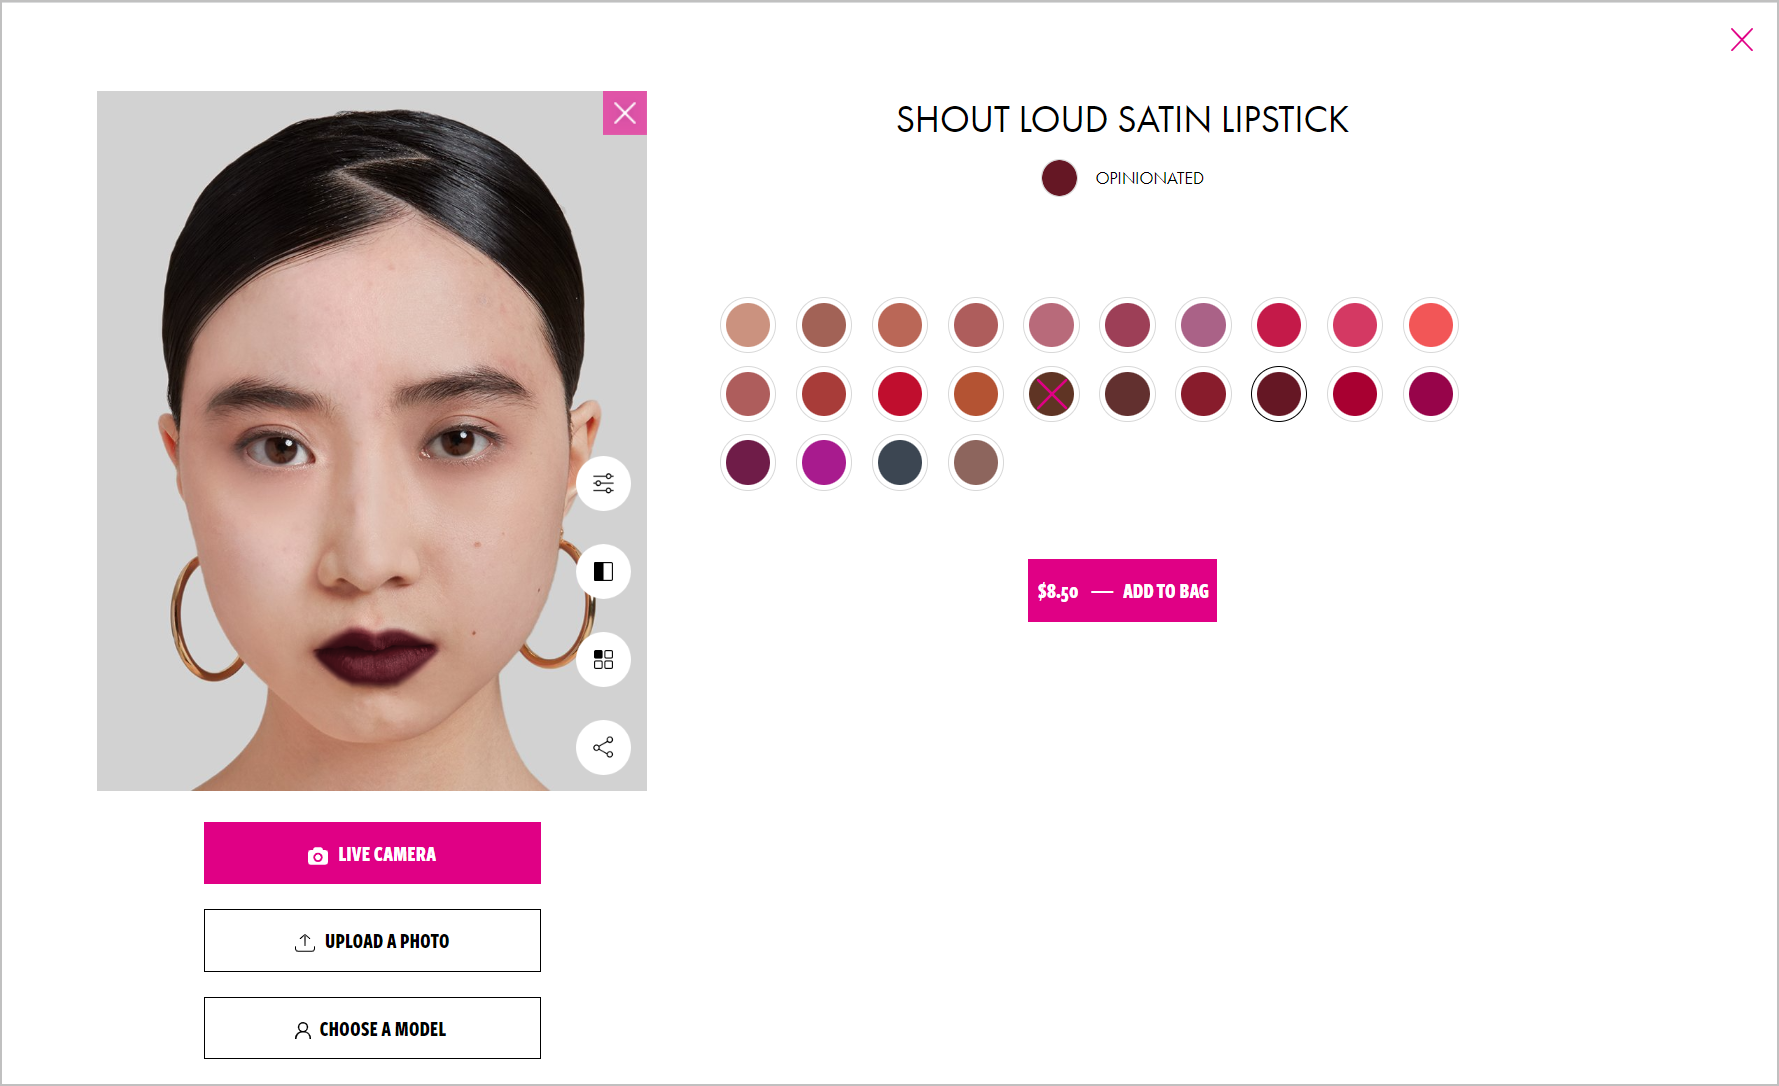 An image of a girl on the left with buttons below it. The product name, available colors, and CTA button are on the right.